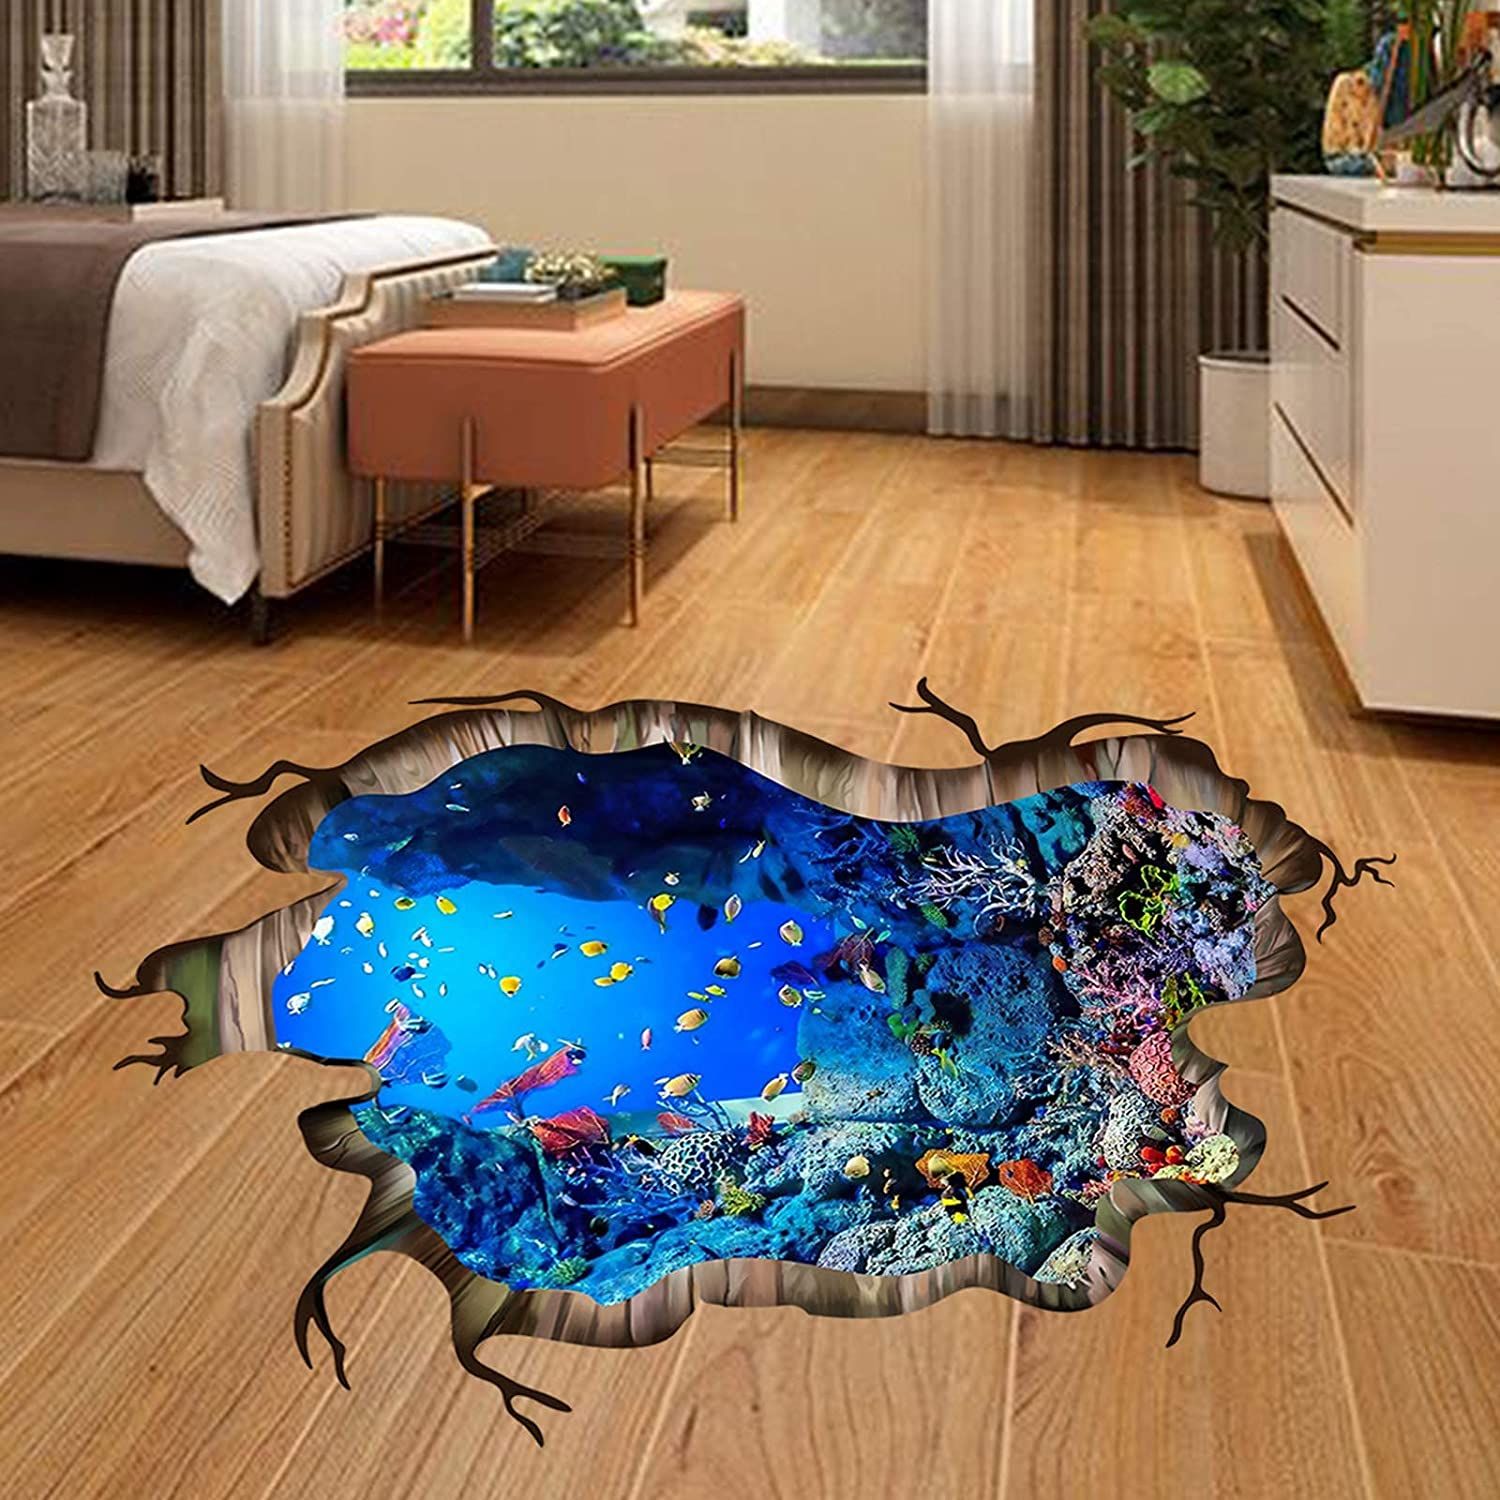 3d Underwater World Wall Decal Home Floor Stickers Decor Vivid Fish Sea  Turtle B | Ebay For Underwater Wood Wall Art (View 14 of 15)